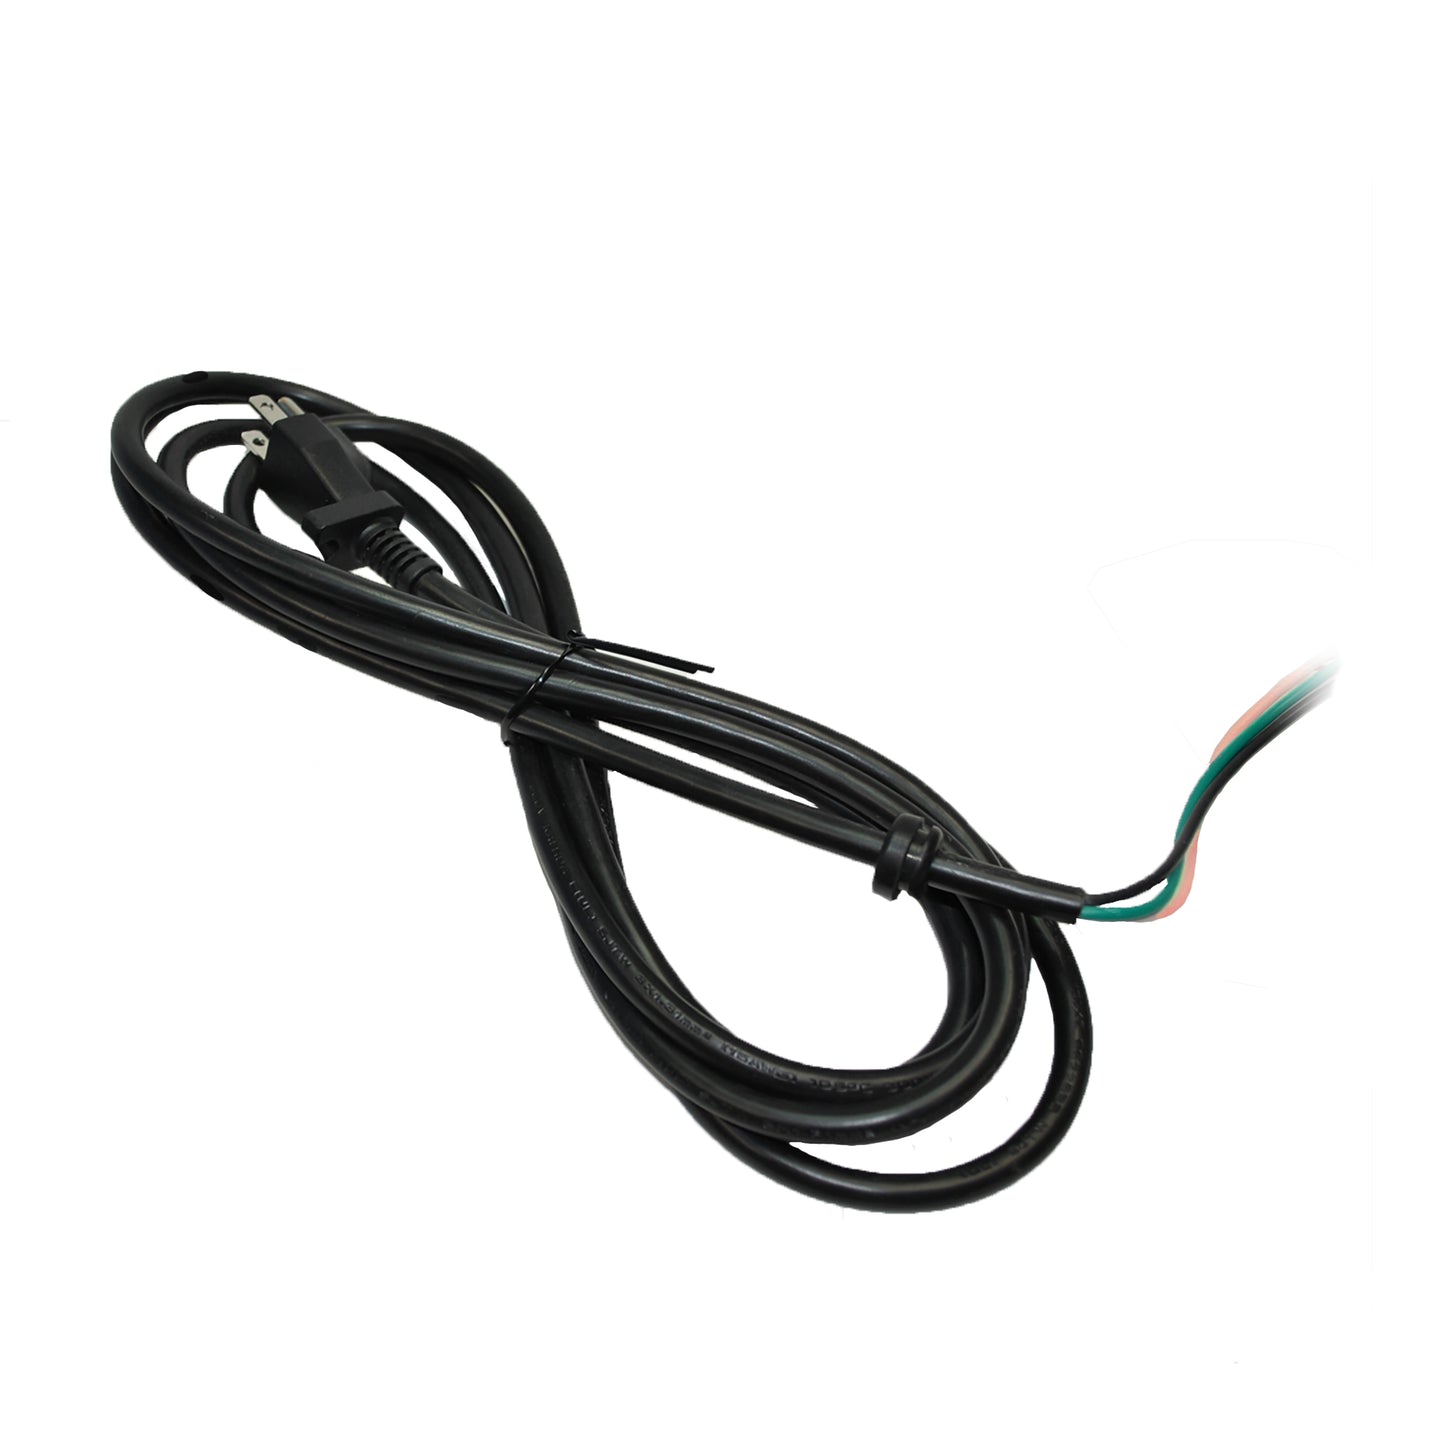 Power Cord for X-2580 Air Scrubber